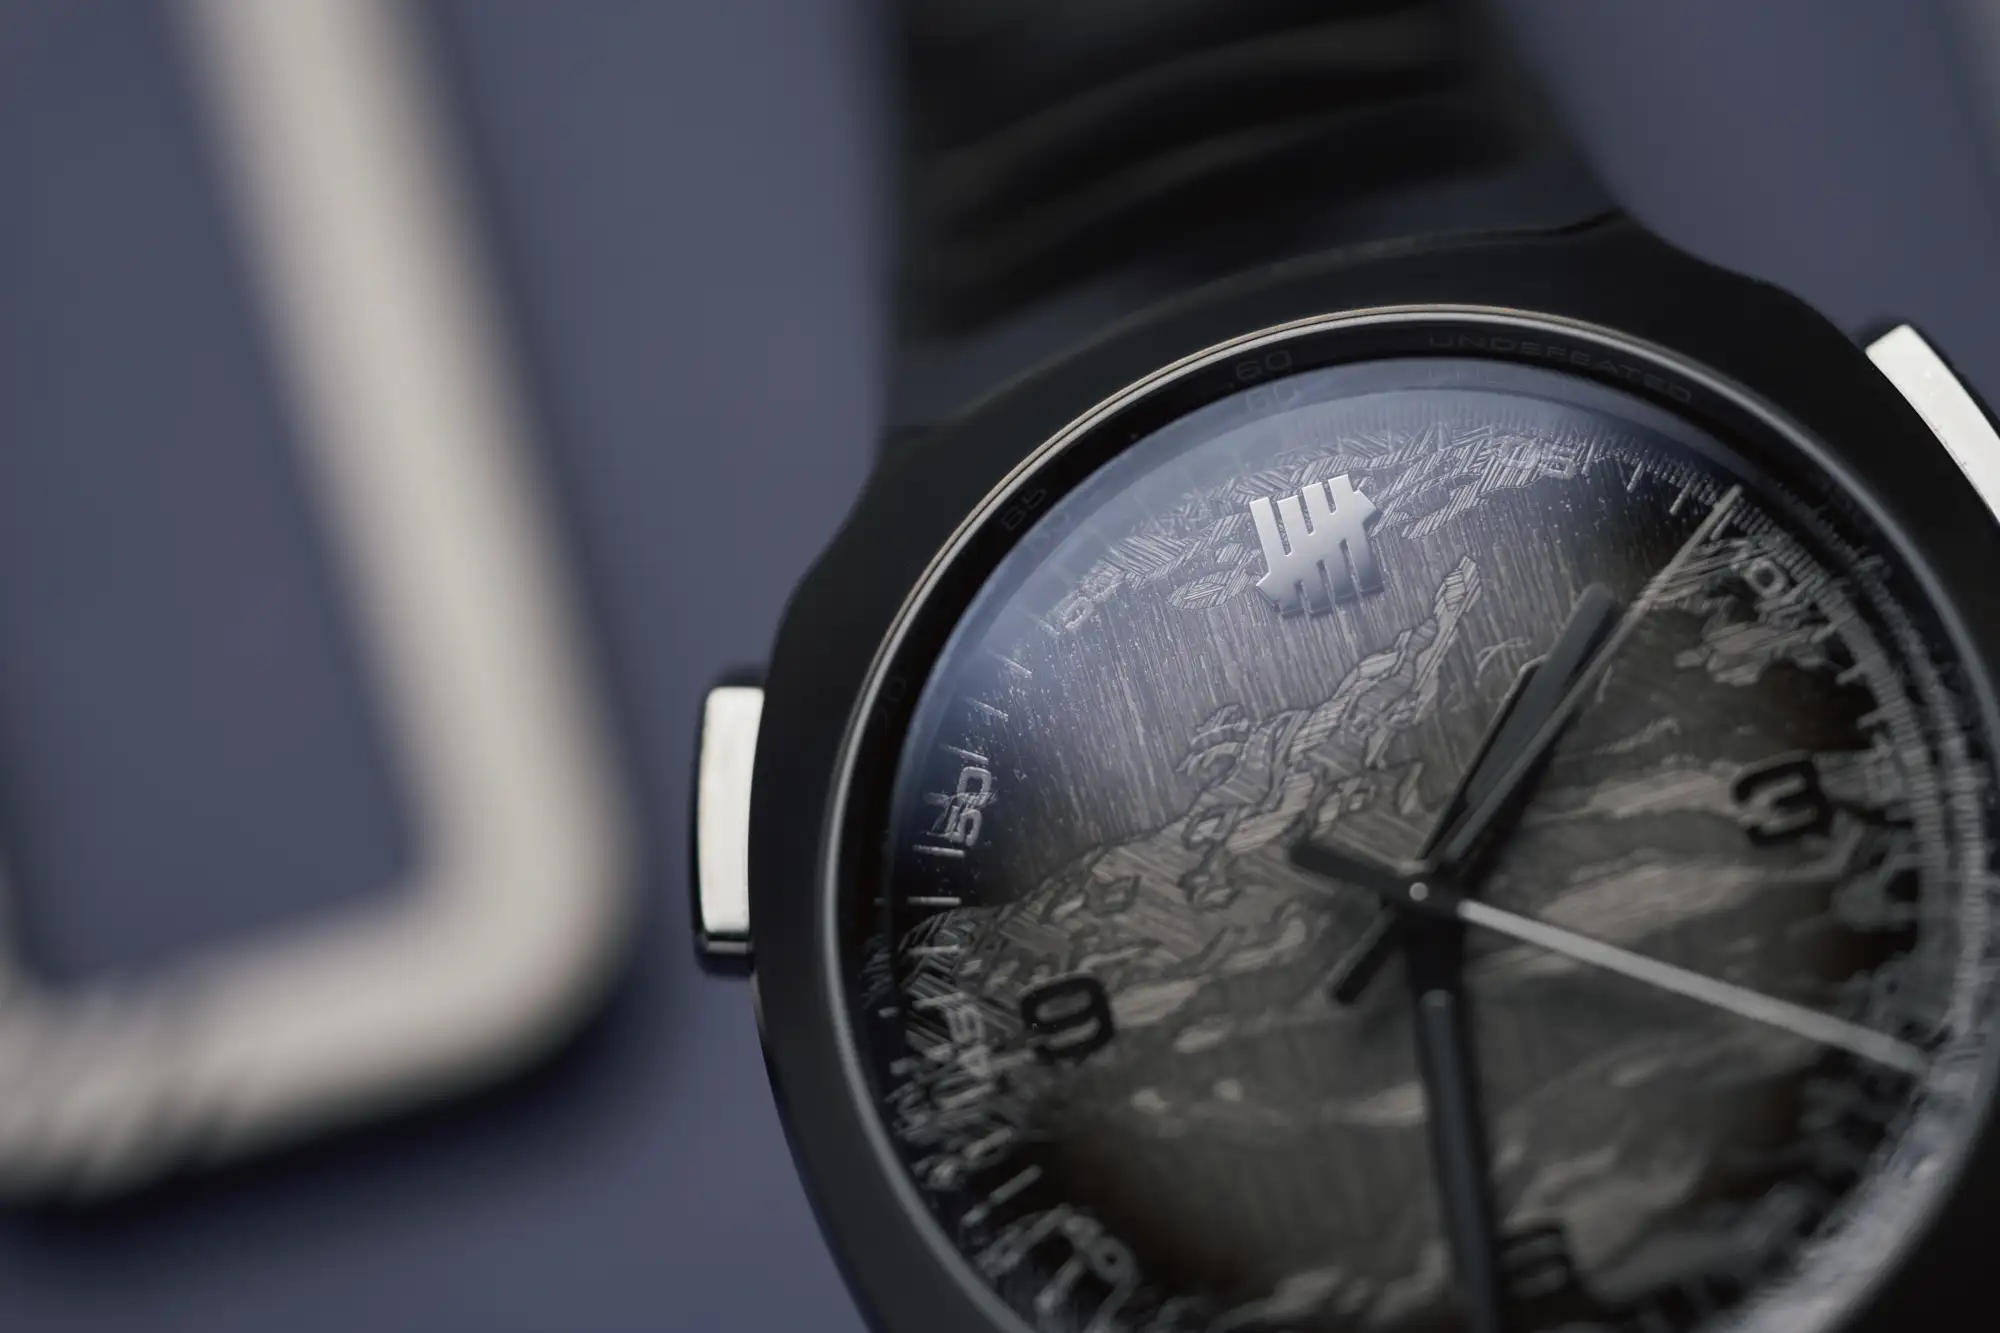 Hands-On With The Very Black H. Moser x UNDEFEATED Streamliner Chronograph